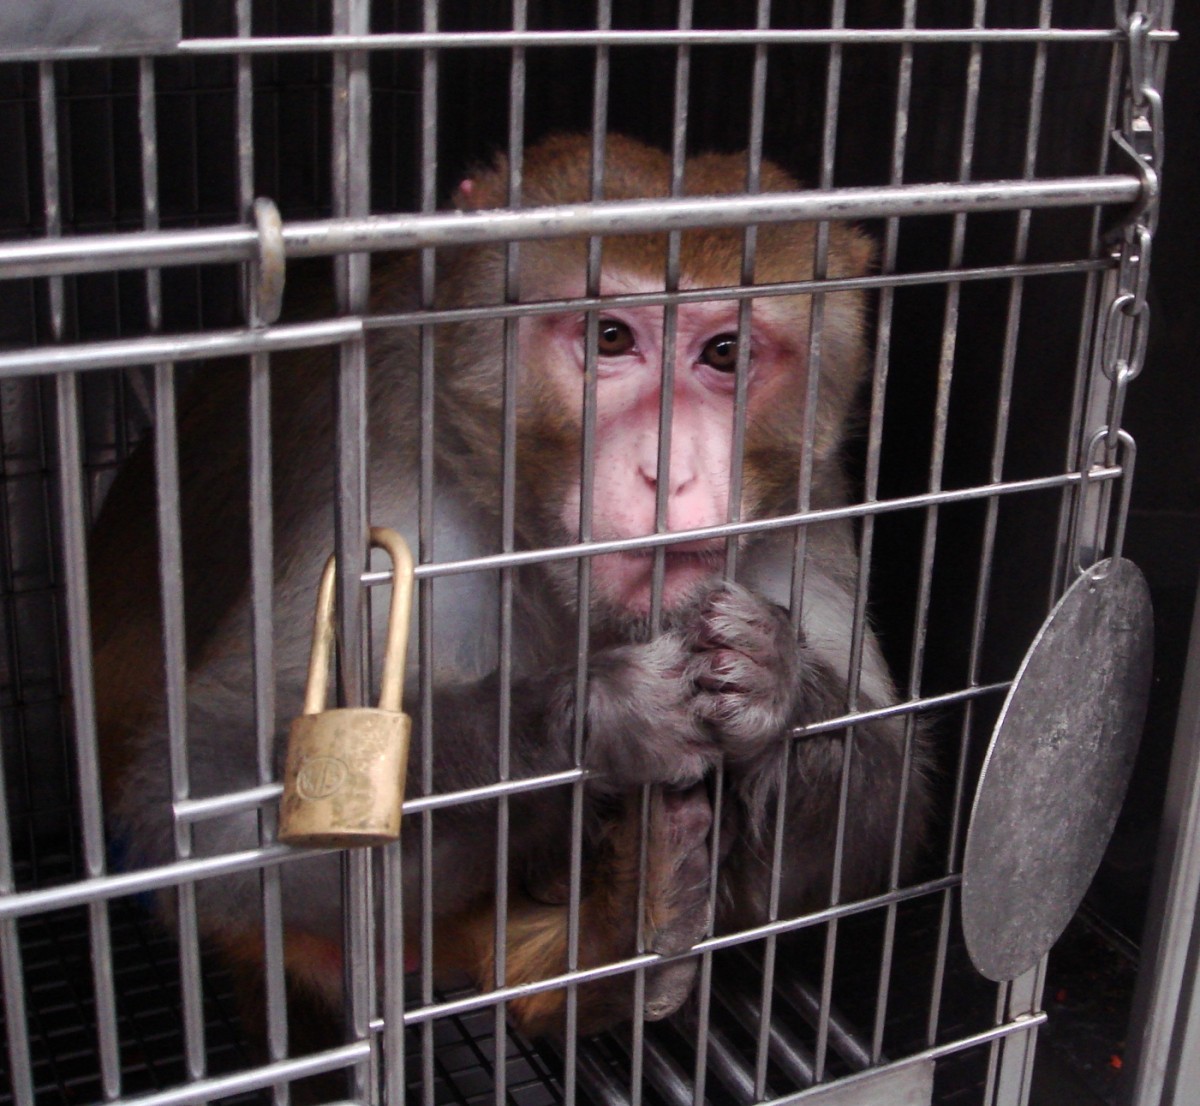 China Southern Airlines Fined for Illegally Shipping Monkeys to Labs